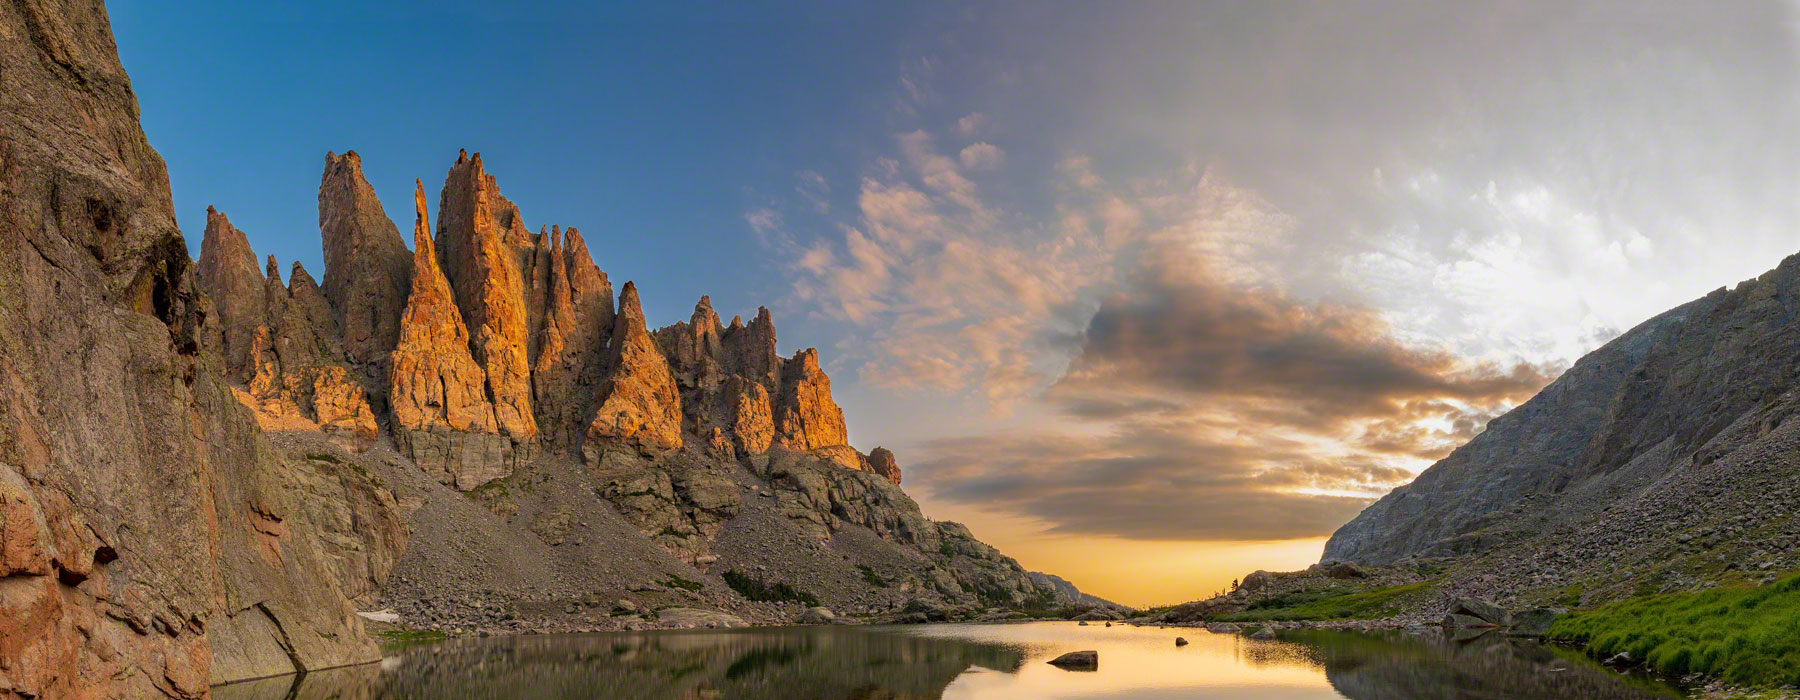 Colorado Photos of Cathedral Spires Reflecting Upon Sky Pond at Sunrise RMNP